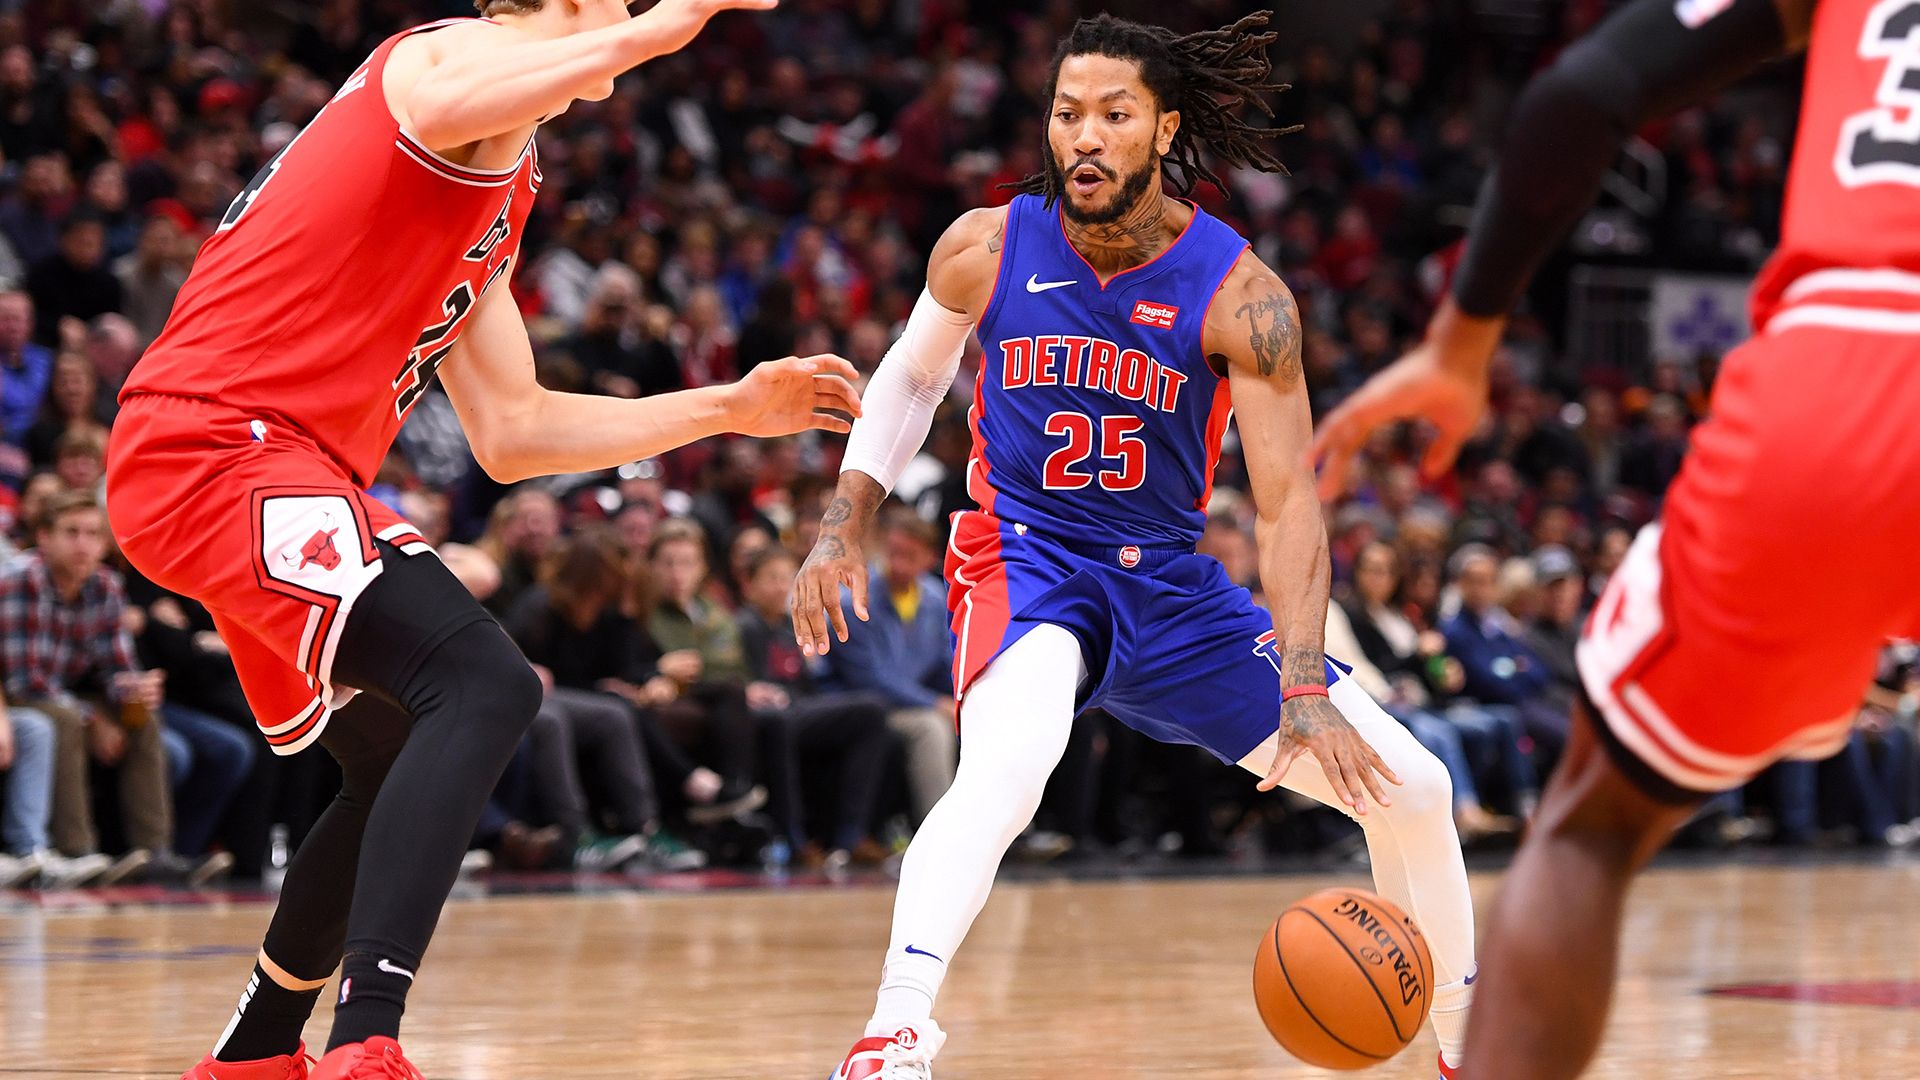 Derrick Rose reflects on his time with the Bulls after Pistons